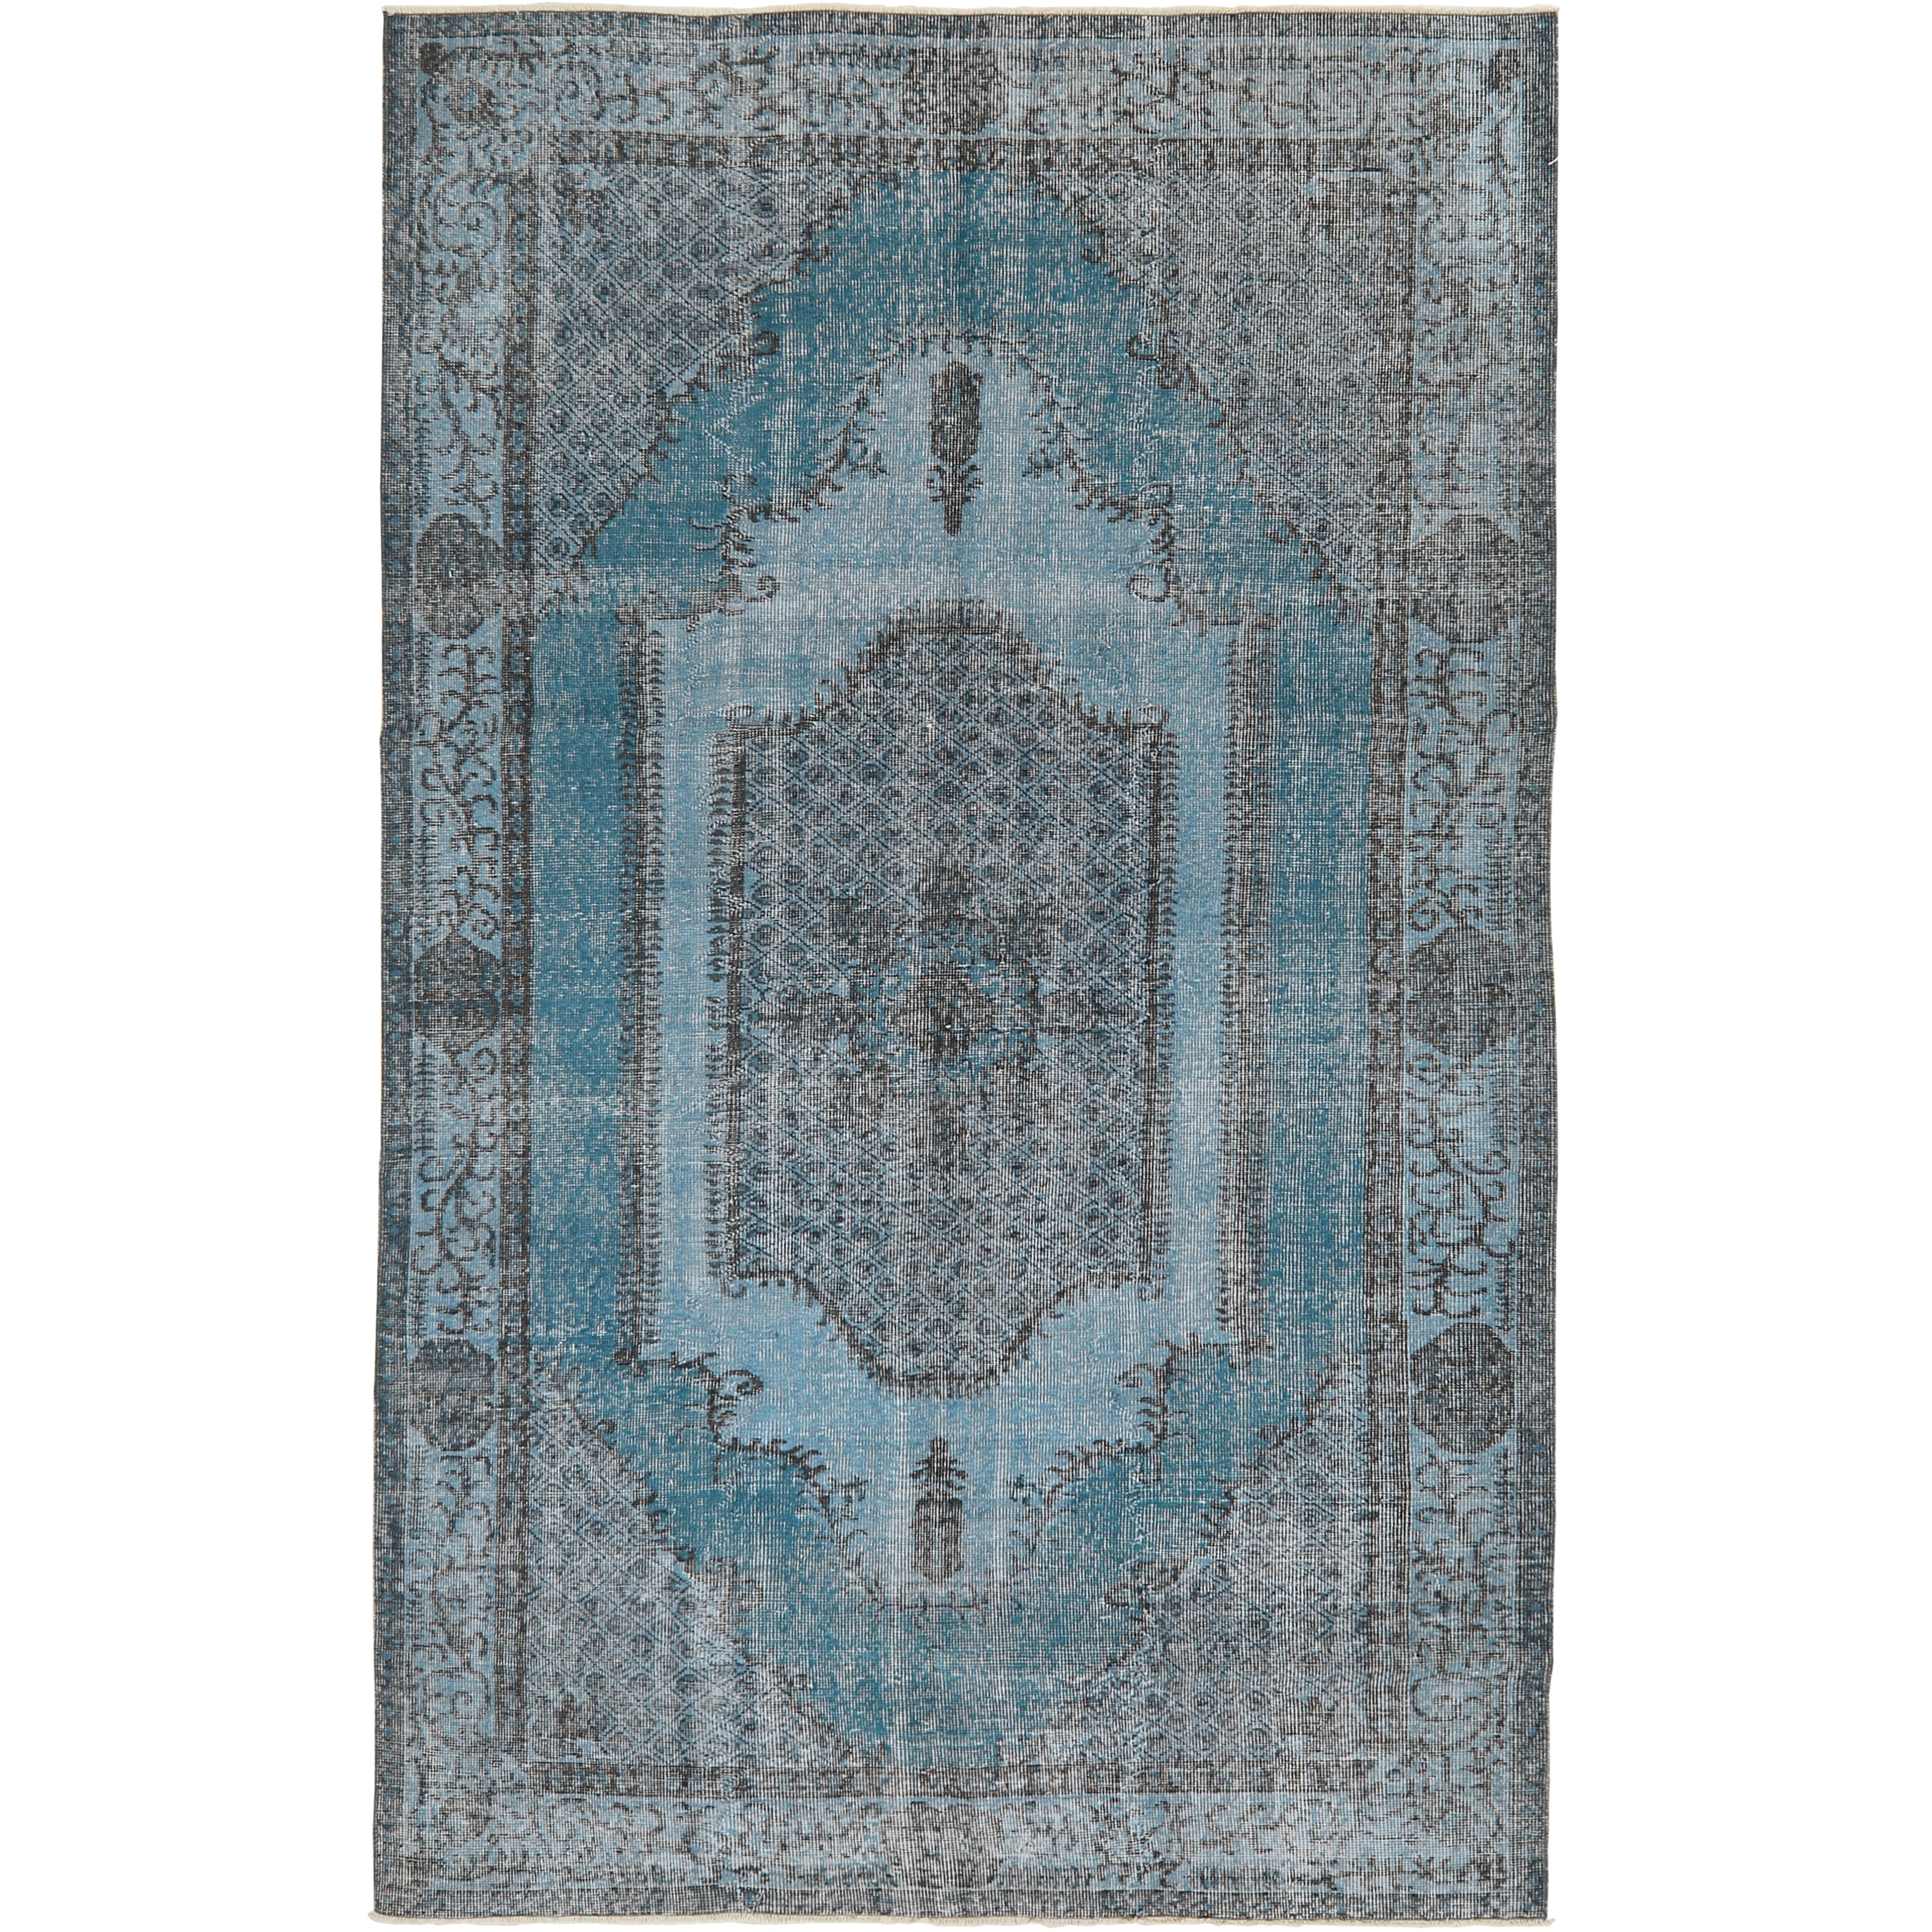 Emely - A Blue Medallion Masterpiece | Kuden Rugs